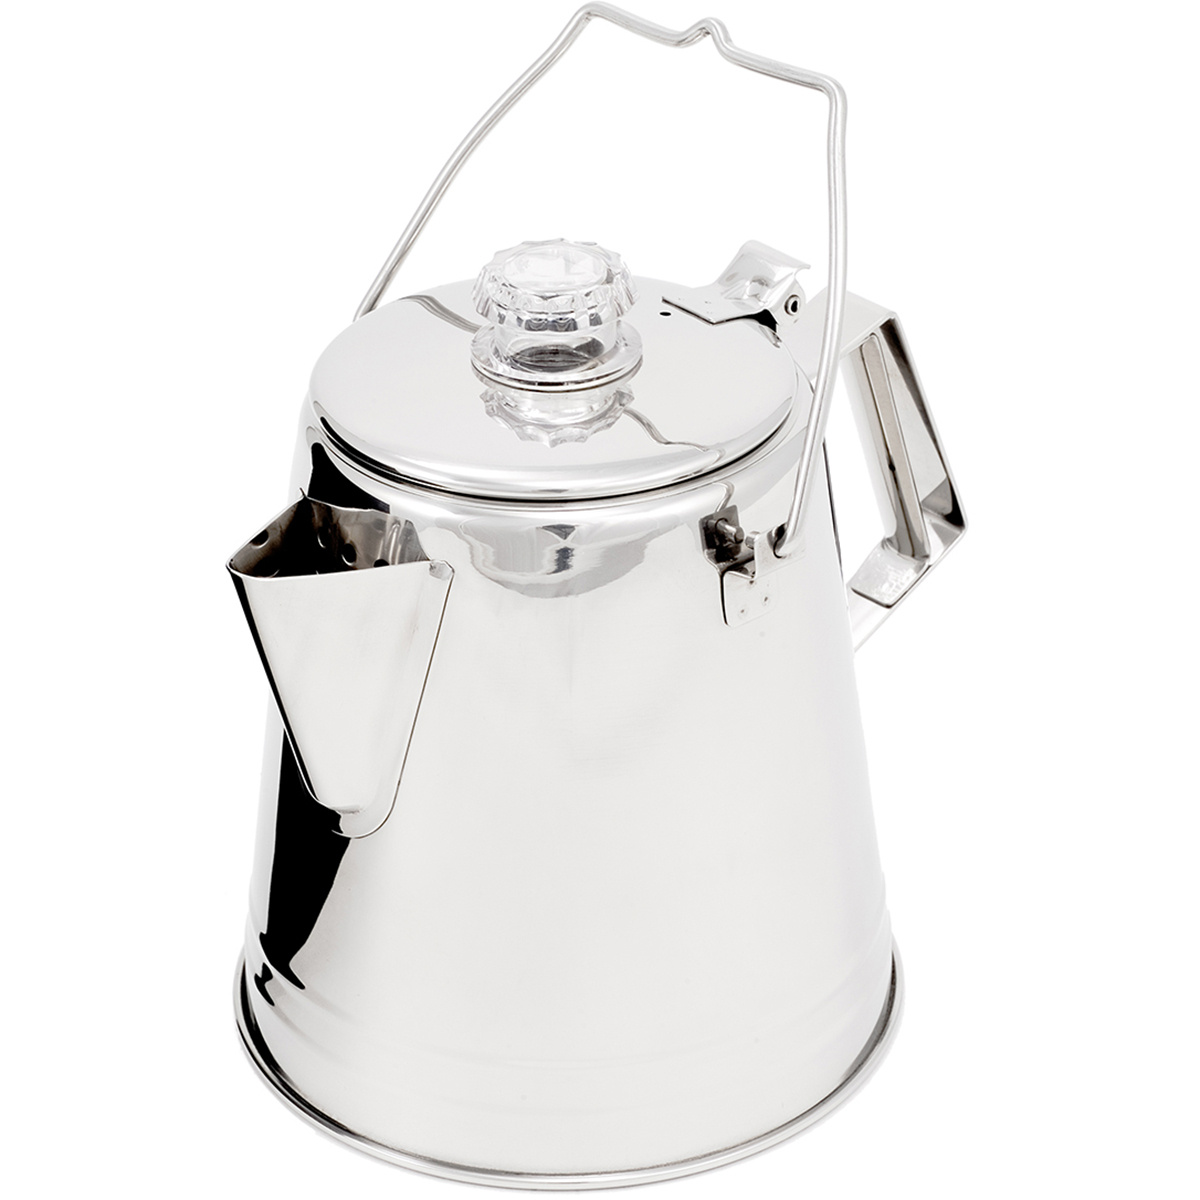 Image of GSI Caffettiera 8 Cup Percolator Glacier Stainless